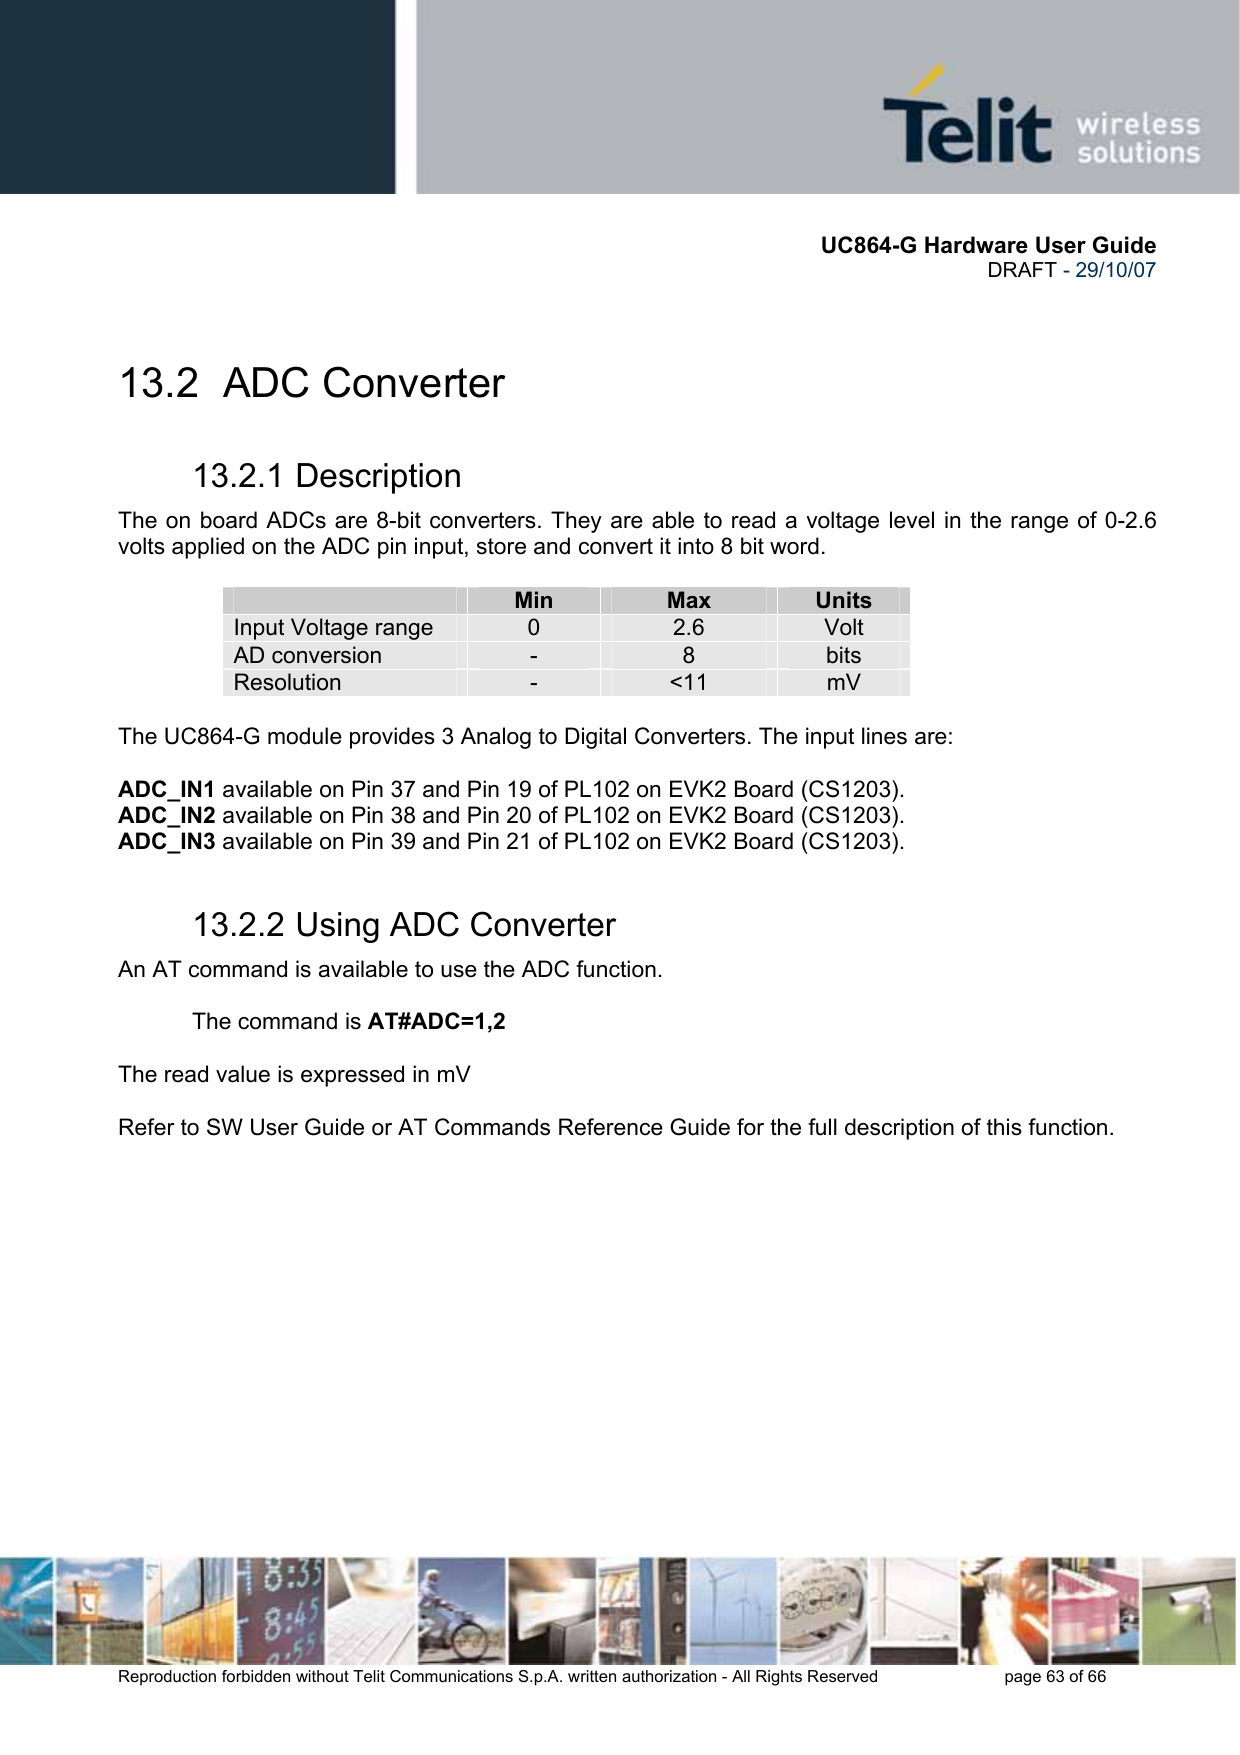       UC864-G Hardware User Guide  DRAFT - 29/10/07      Reproduction forbidden without Telit Communications S.p.A. written authorization - All Rights Reserved    page 63 of 66   13.2 ADC Converter 13.2.1 Description The on board ADCs are 8-bit converters. They are able to read a voltage level in the range of 0-2.6 volts applied on the ADC pin input, store and convert it into 8 bit word.    Min  Max  Units Input Voltage range  0  2.6  Volt AD conversion  -  8  bits Resolution  -  &lt;11  mV  The UC864-G module provides 3 Analog to Digital Converters. The input lines are:  ADC_IN1 available on Pin 37 and Pin 19 of PL102 on EVK2 Board (CS1203). ADC_IN2 available on Pin 38 and Pin 20 of PL102 on EVK2 Board (CS1203). ADC_IN3 available on Pin 39 and Pin 21 of PL102 on EVK2 Board (CS1203). 13.2.2 Using ADC Converter An AT command is available to use the ADC function.  The command is AT#ADC=1,2  The read value is expressed in mV  Refer to SW User Guide or AT Commands Reference Guide for the full description of this function.   